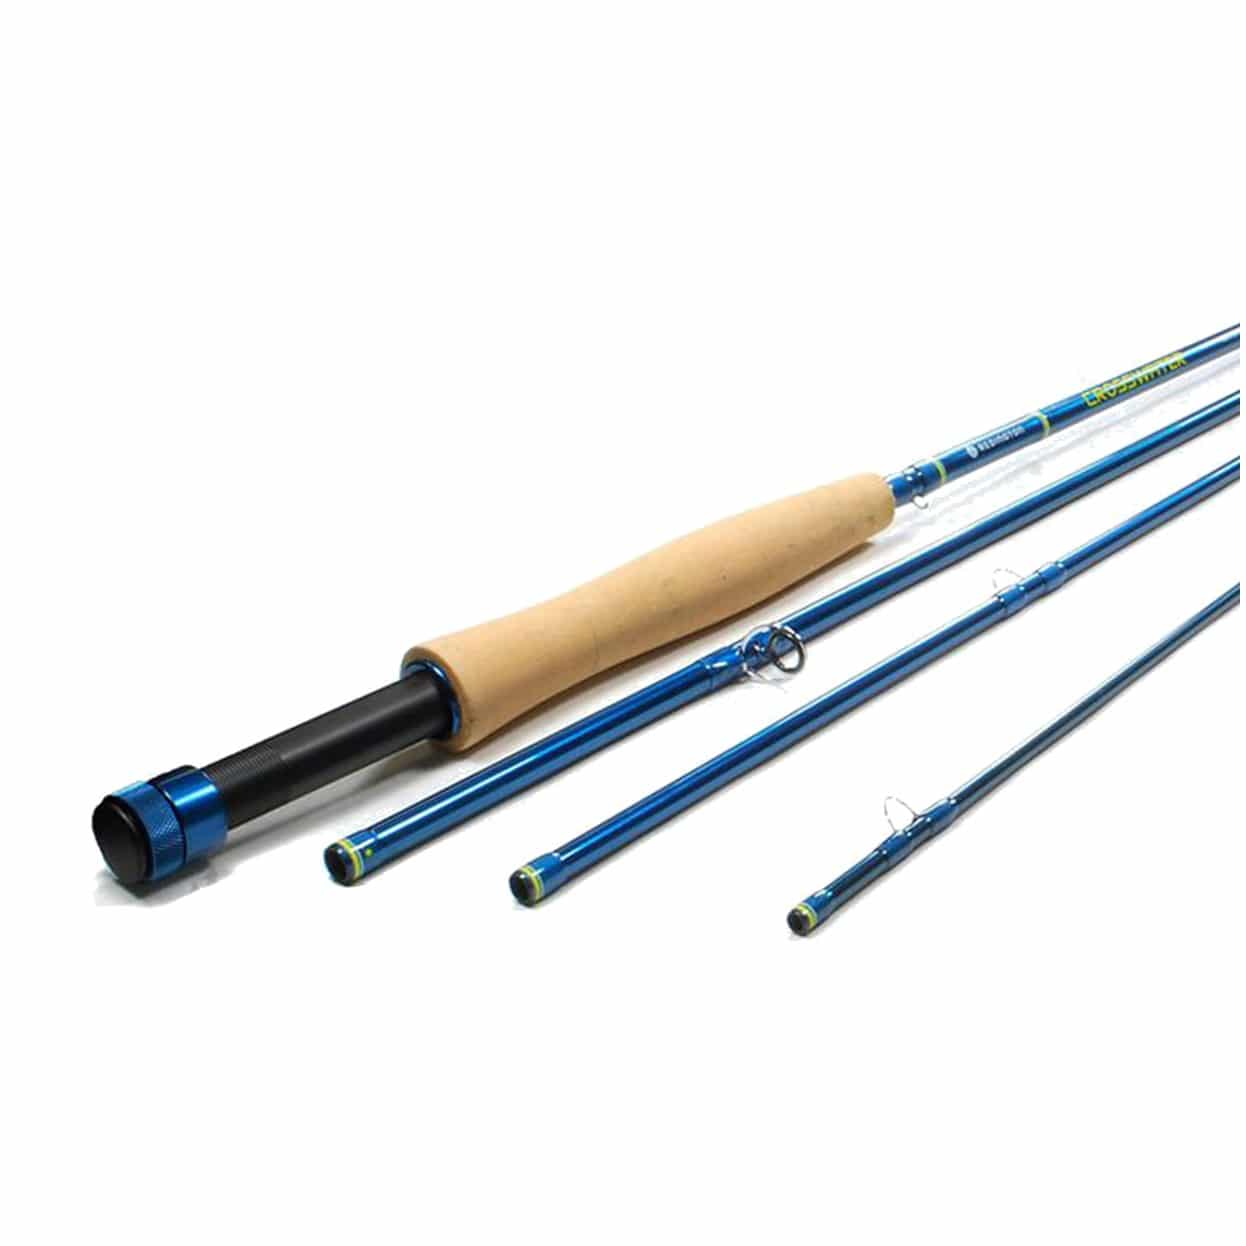 Redington Crosswater 4 Piece Fly Rod 890-4 With Bag 8WT 9FT New